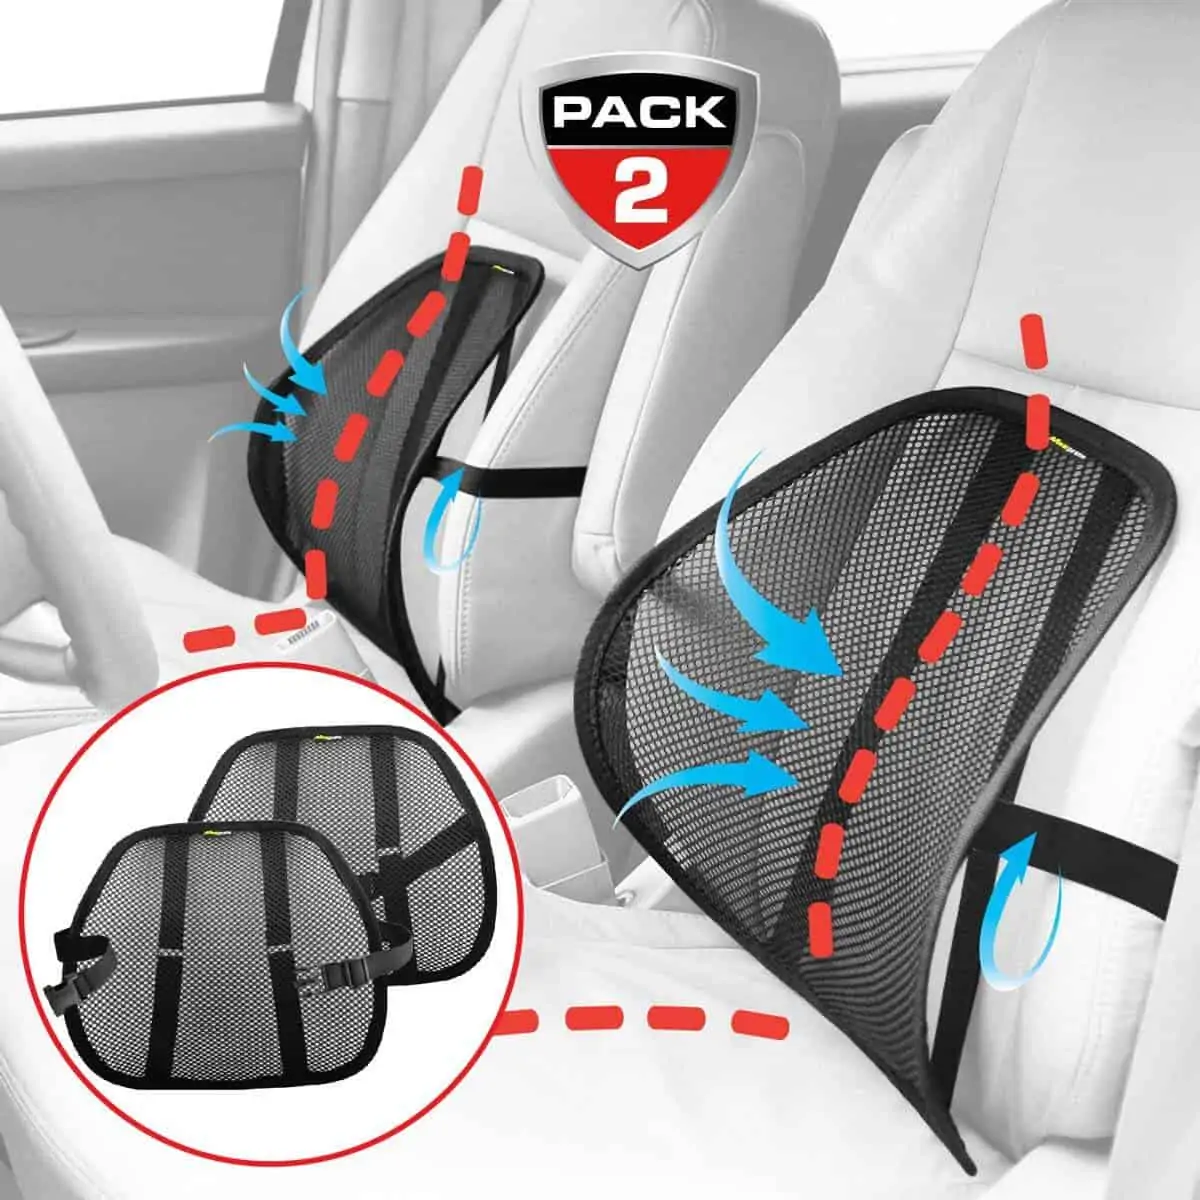 The Best Lumbar Support for Cars of 2023